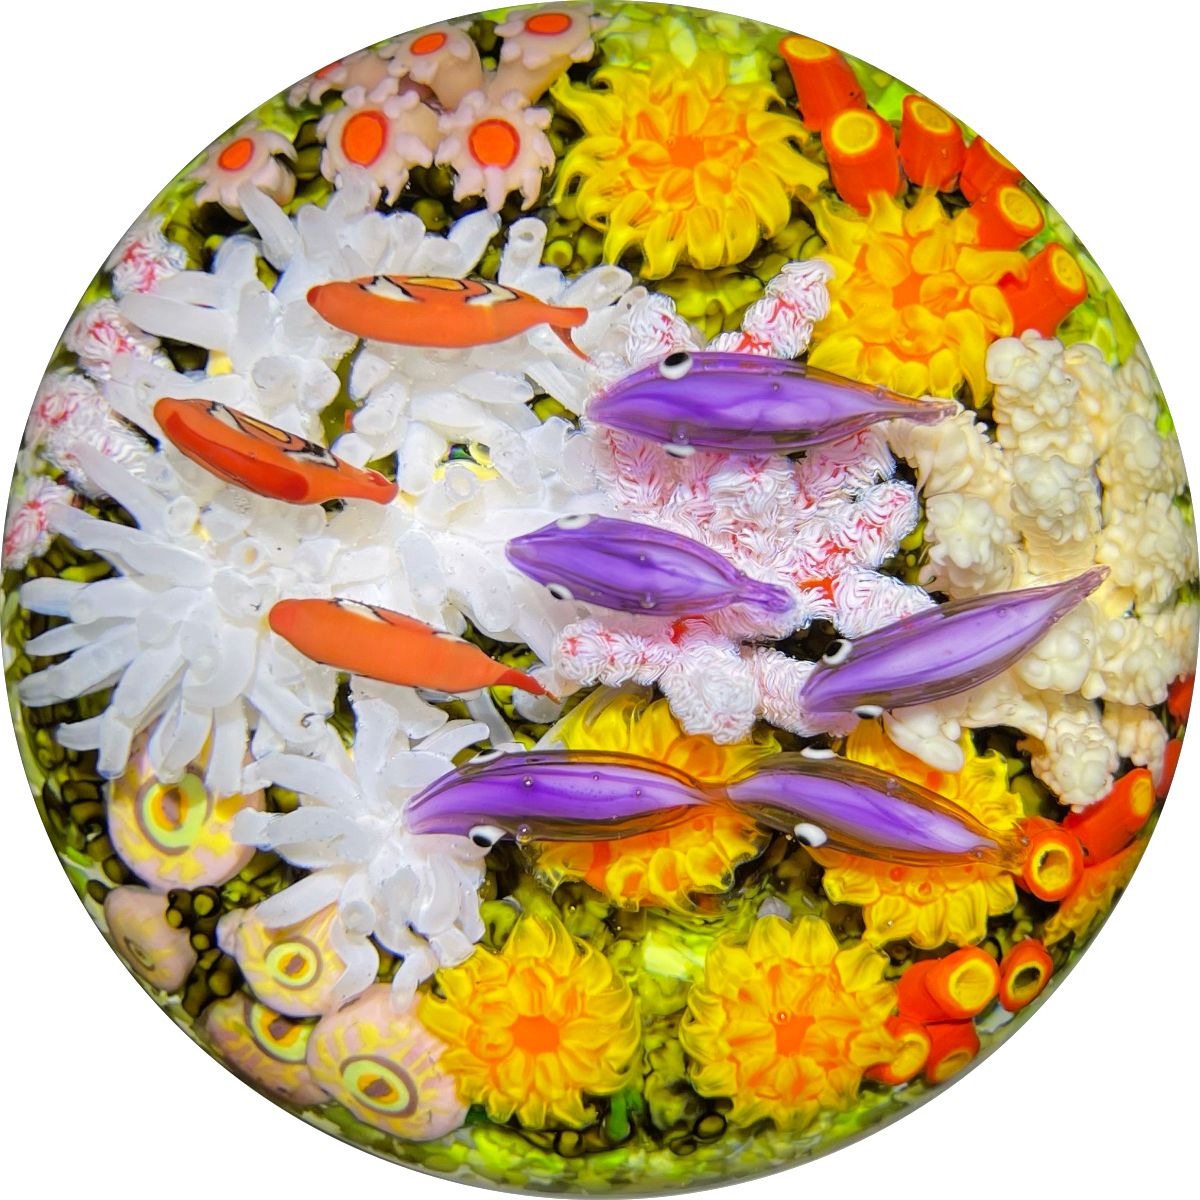 Cathy Richardson 2021 Flamework Coral Reef with Yellow Jewel Anemone & Tropical Fish 1 of 1